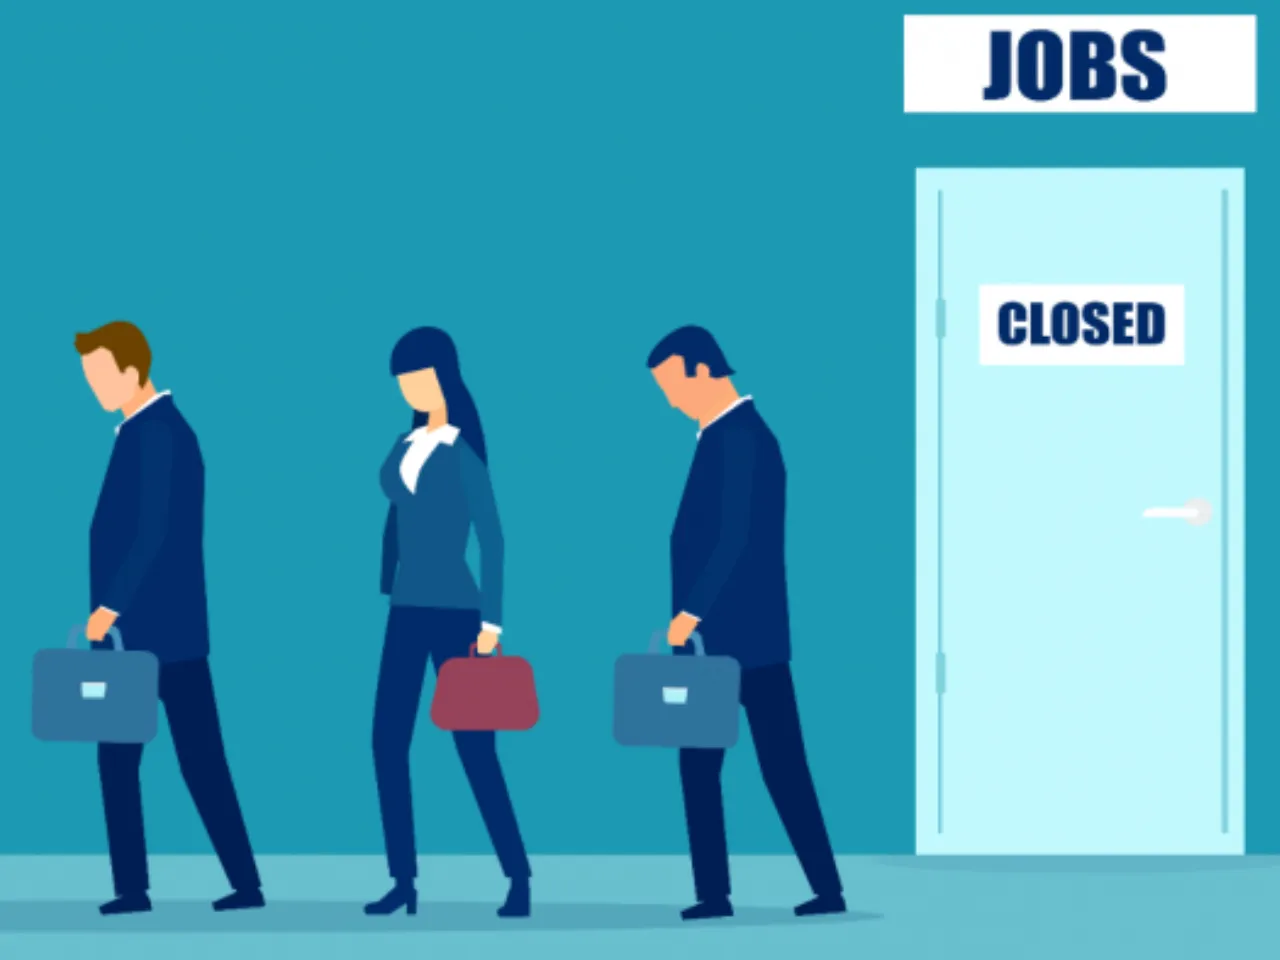 Indian Startup Hiring for Senior Roles Drops 80% in Q1 2023